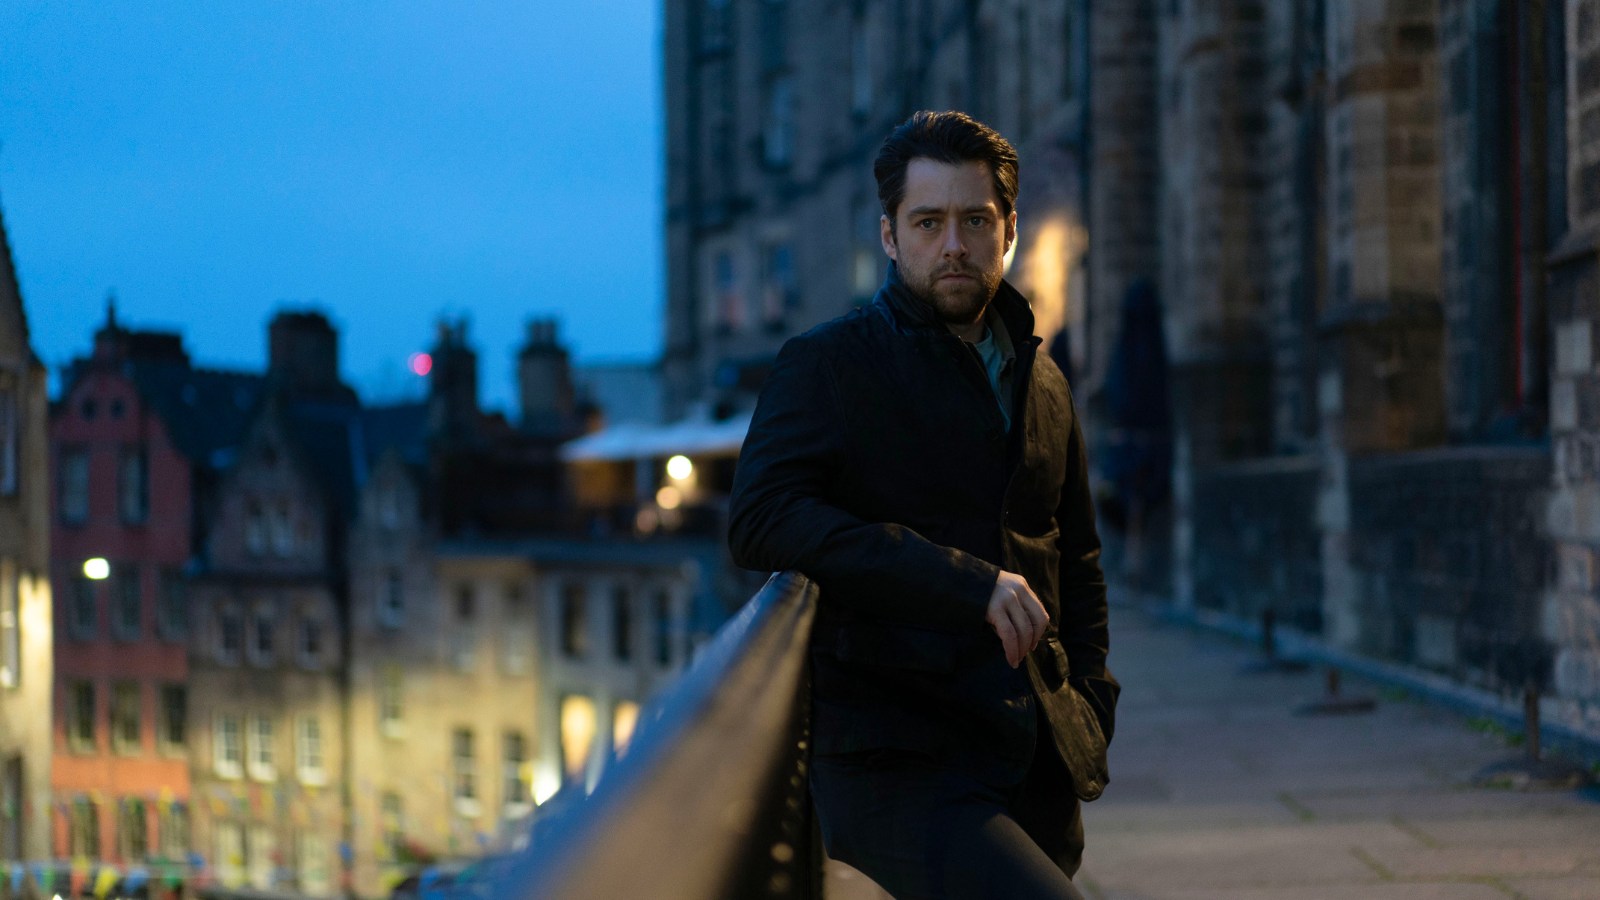 Still from Rebus, courtesy of BBC. Richard Rankin wears black jacket and trousers and leans on a railing on Victoria Terrace in Edinburgh.